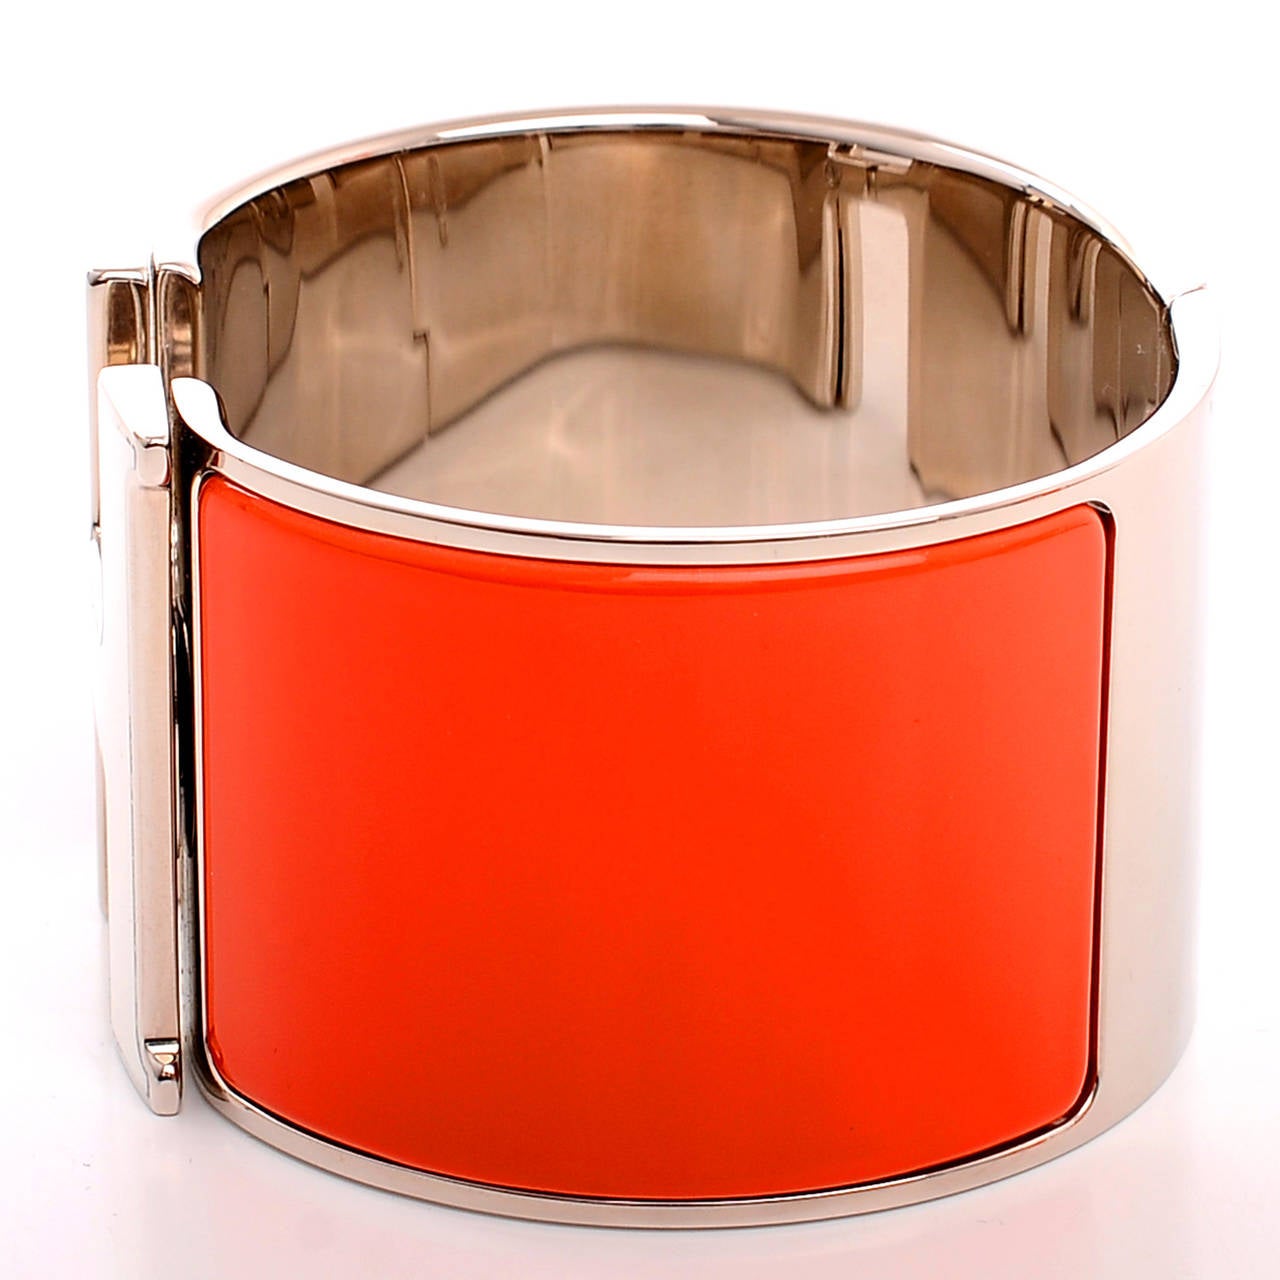 Hermes extra wide Clic Clac H bracelet in Capucine enamel with white enamel H closure and palladium plated hardware in size PM.

Origin: France

Condition: Pristine, store fresh condition

Accompanied by: Hermes box and dustbag,